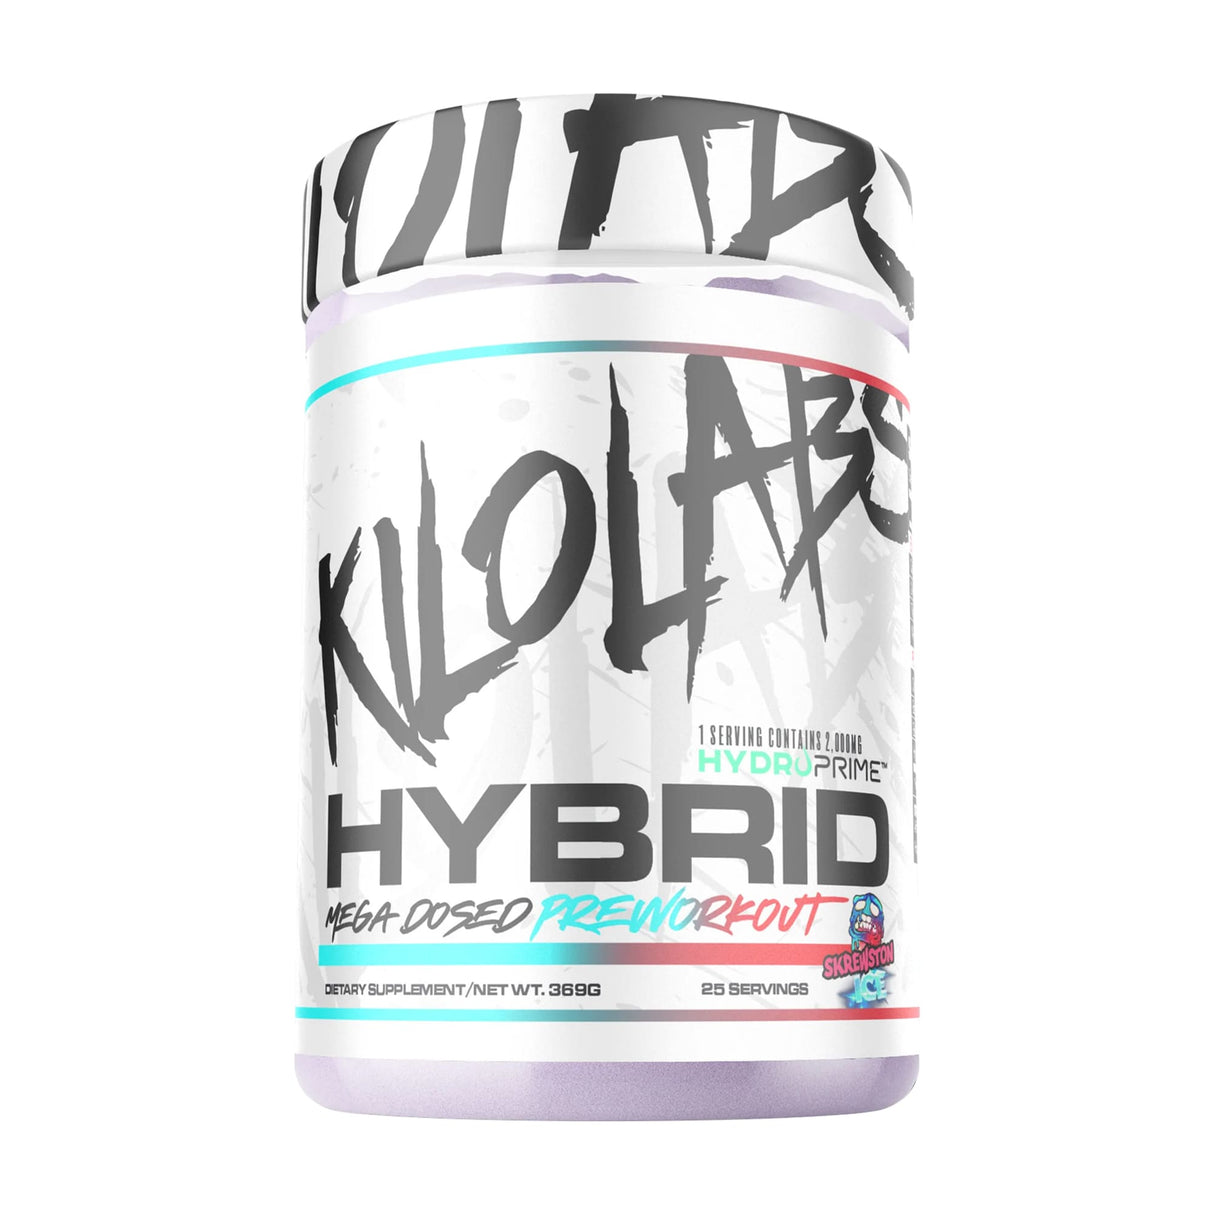 HYBRID Pre-Workout by KILO LABS - Muscle Factory, LLC